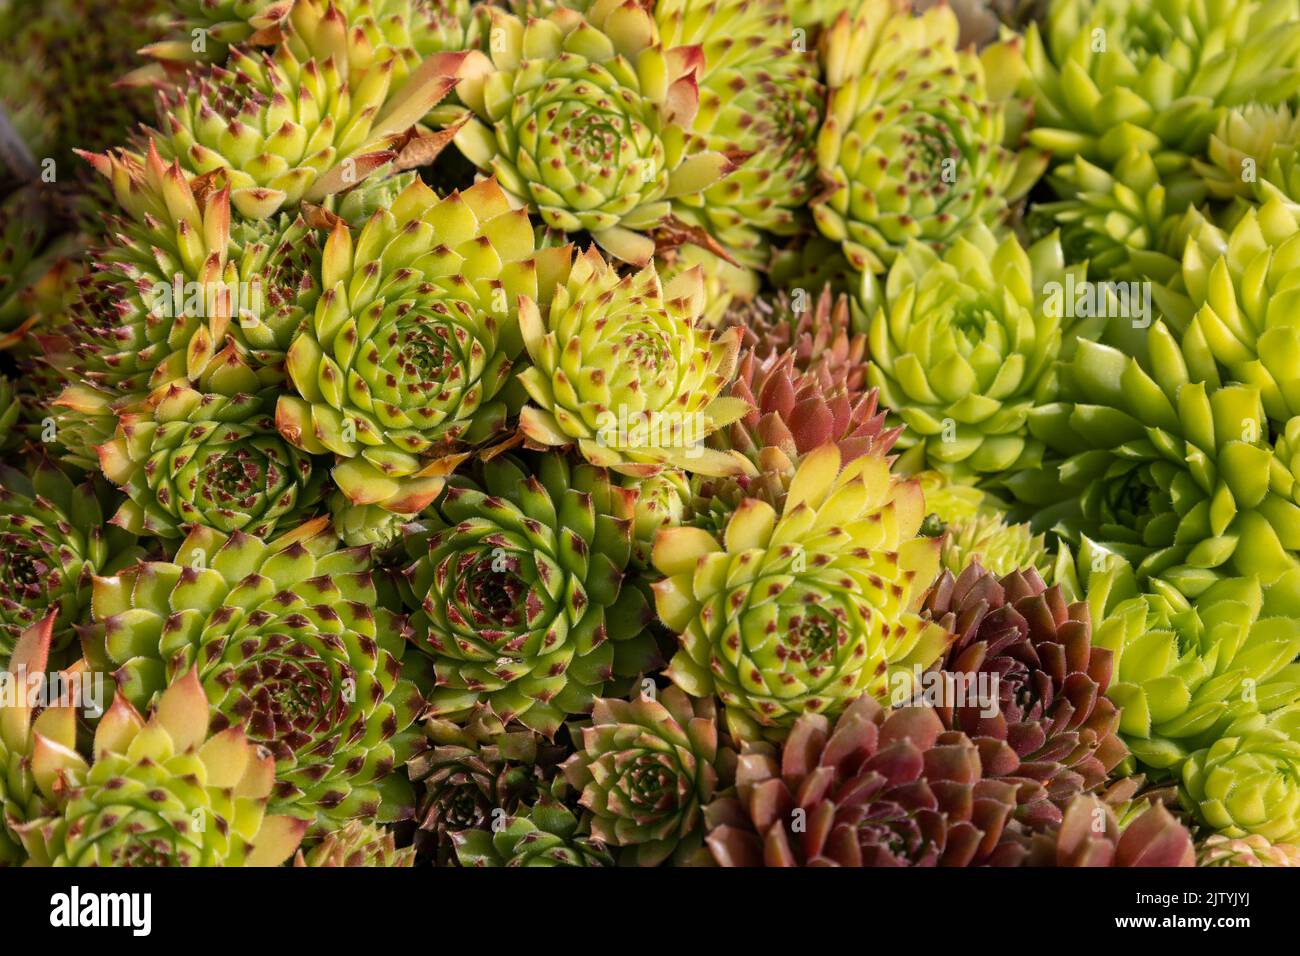 Sempervivum an evergreen succulent in the family of sedum species. Semper means always and vivus means life, so the name of the plant is always life i Stock Photo